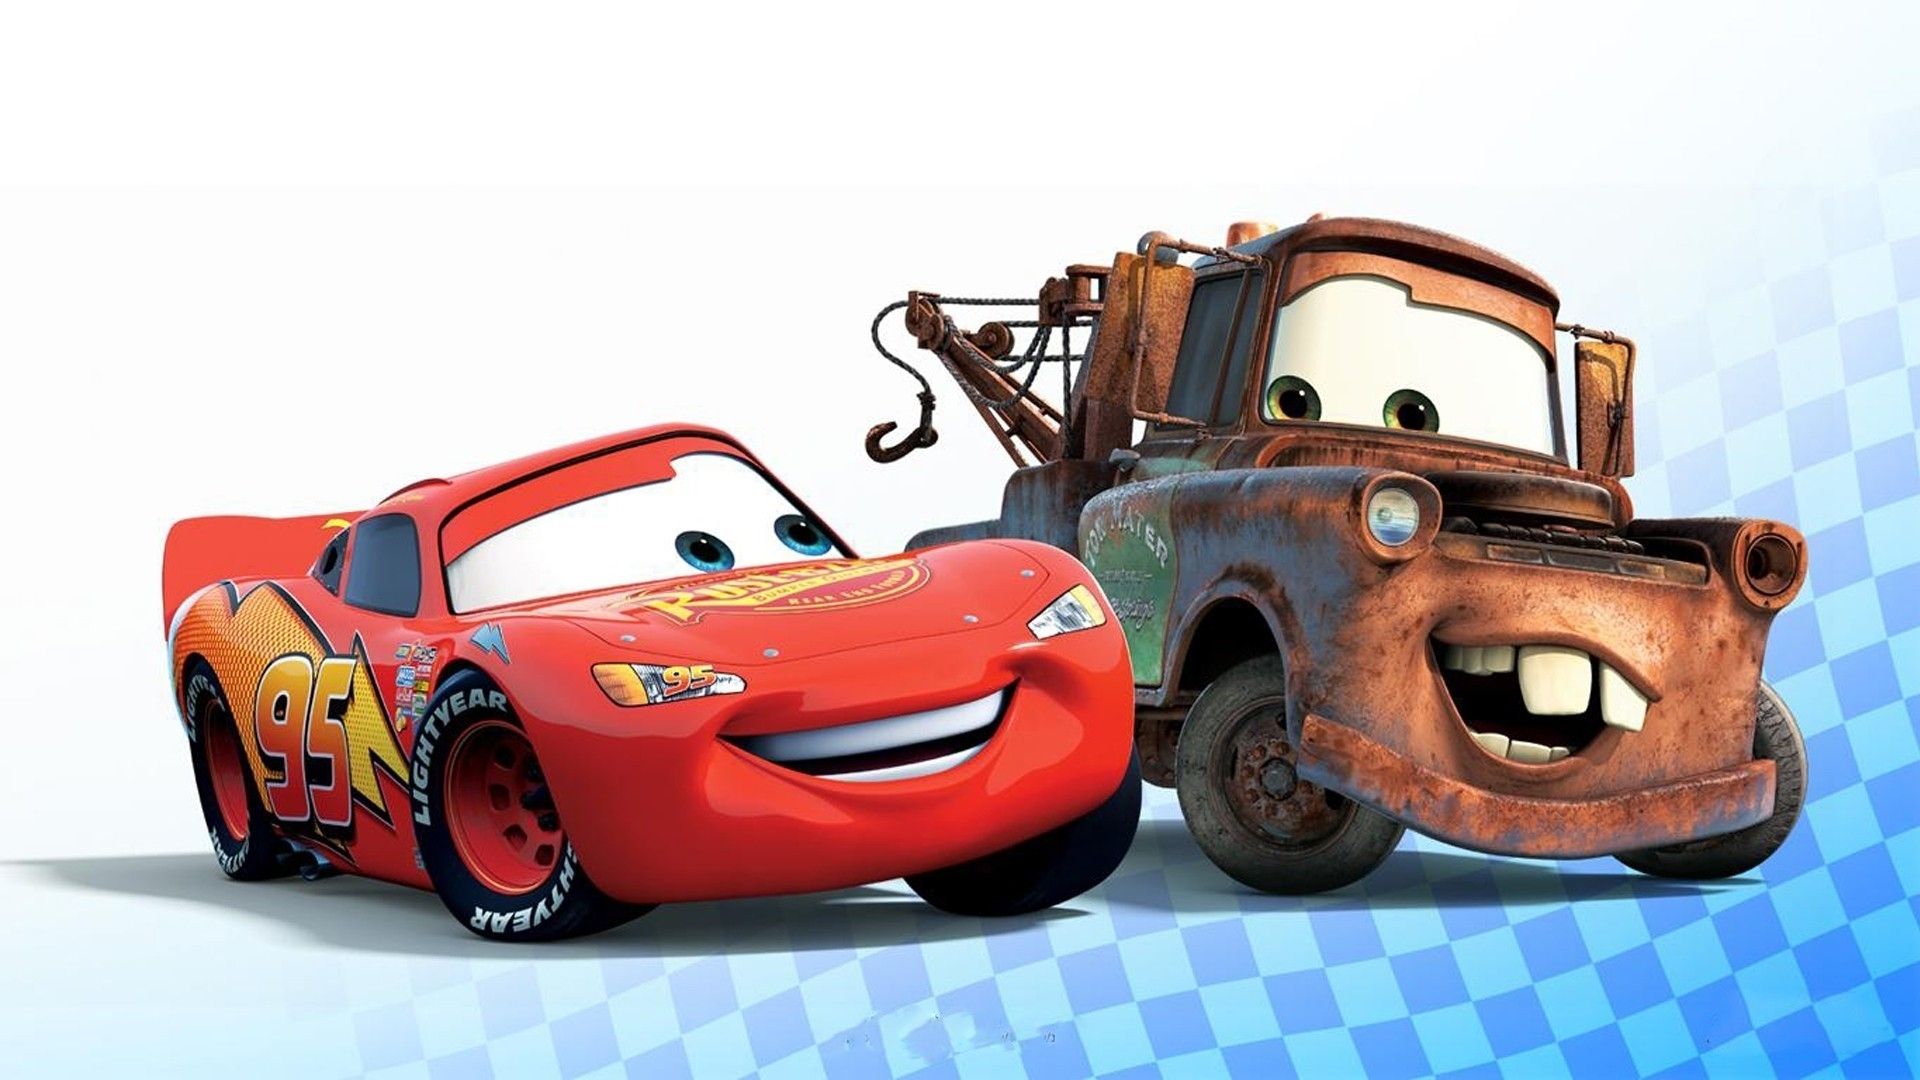 Disney's Cars Background. Awesome Cars Wallpaper, Disney Cars Wallpaper and Cool Cars Wallpaper